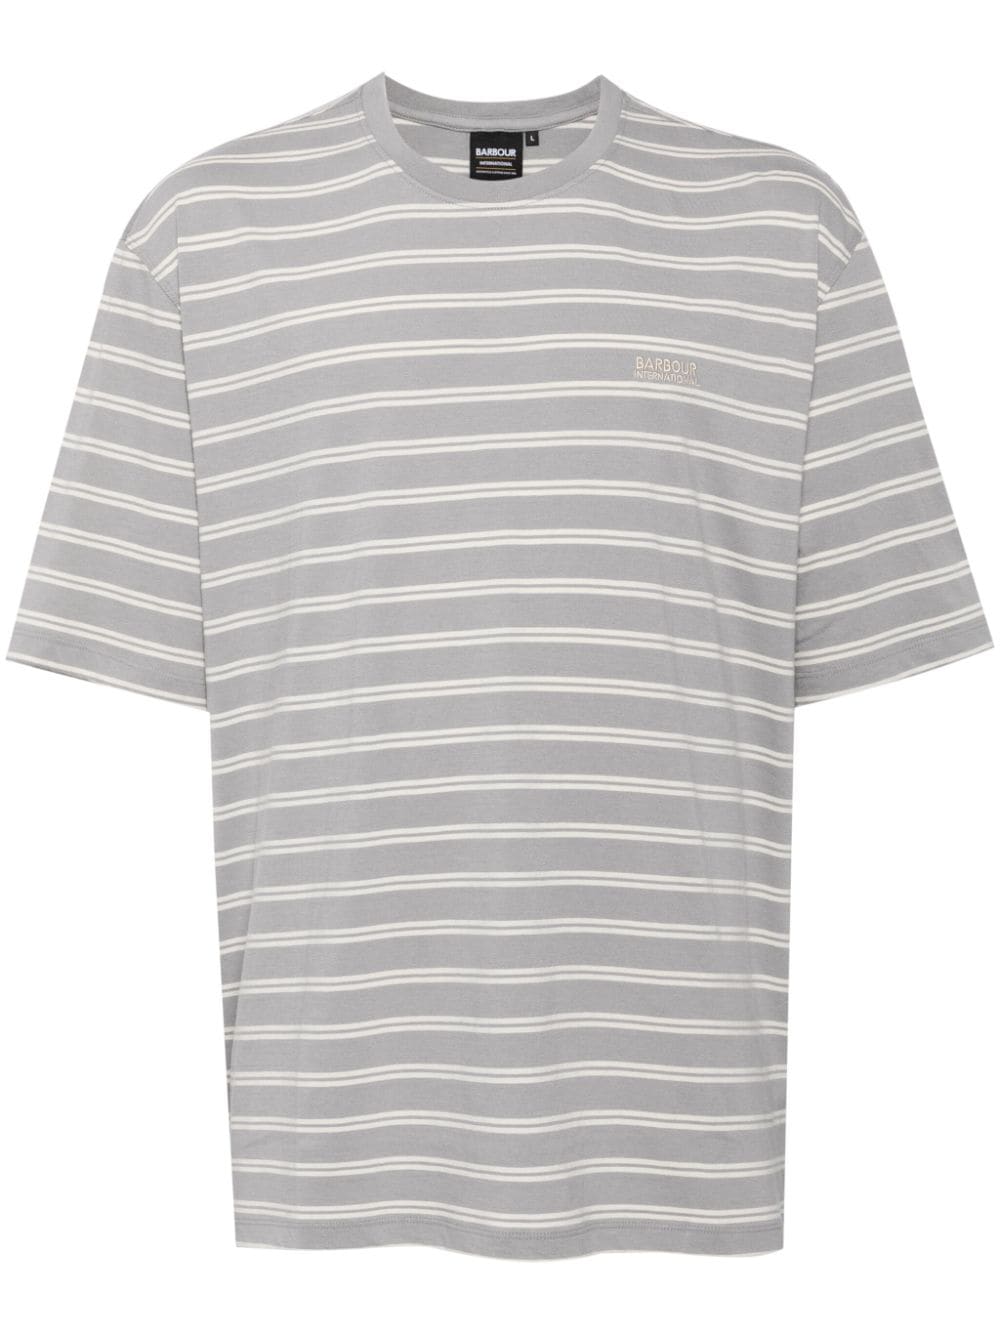 Barbour Striped Cotton T-shirt In Gray